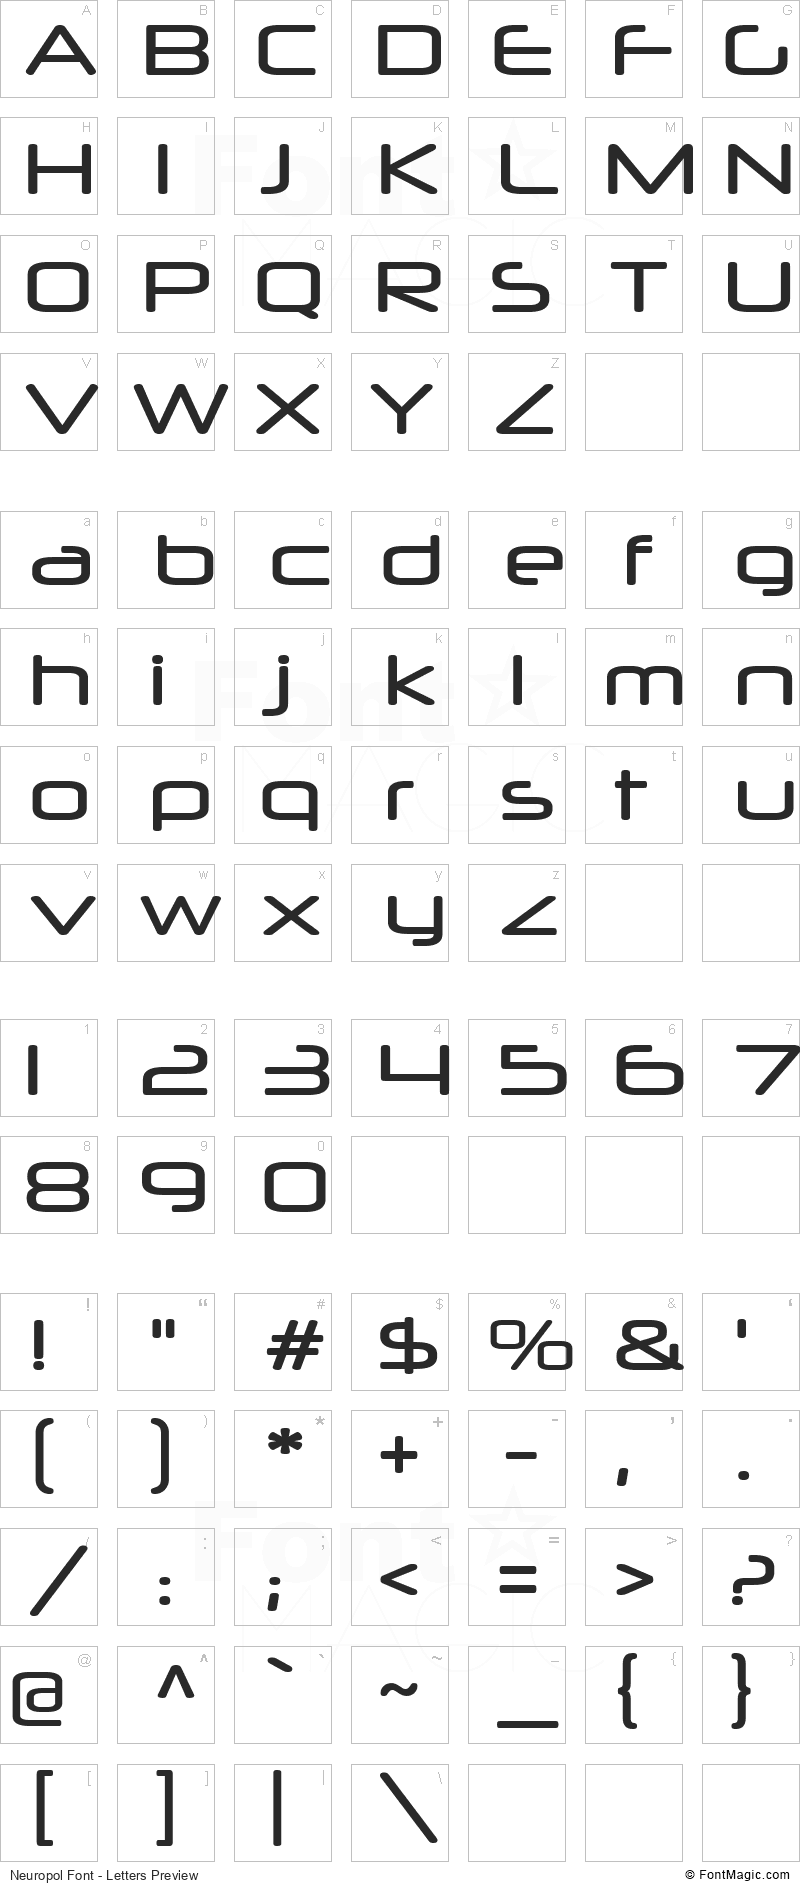 Neuropol Font - All Latters Preview Chart